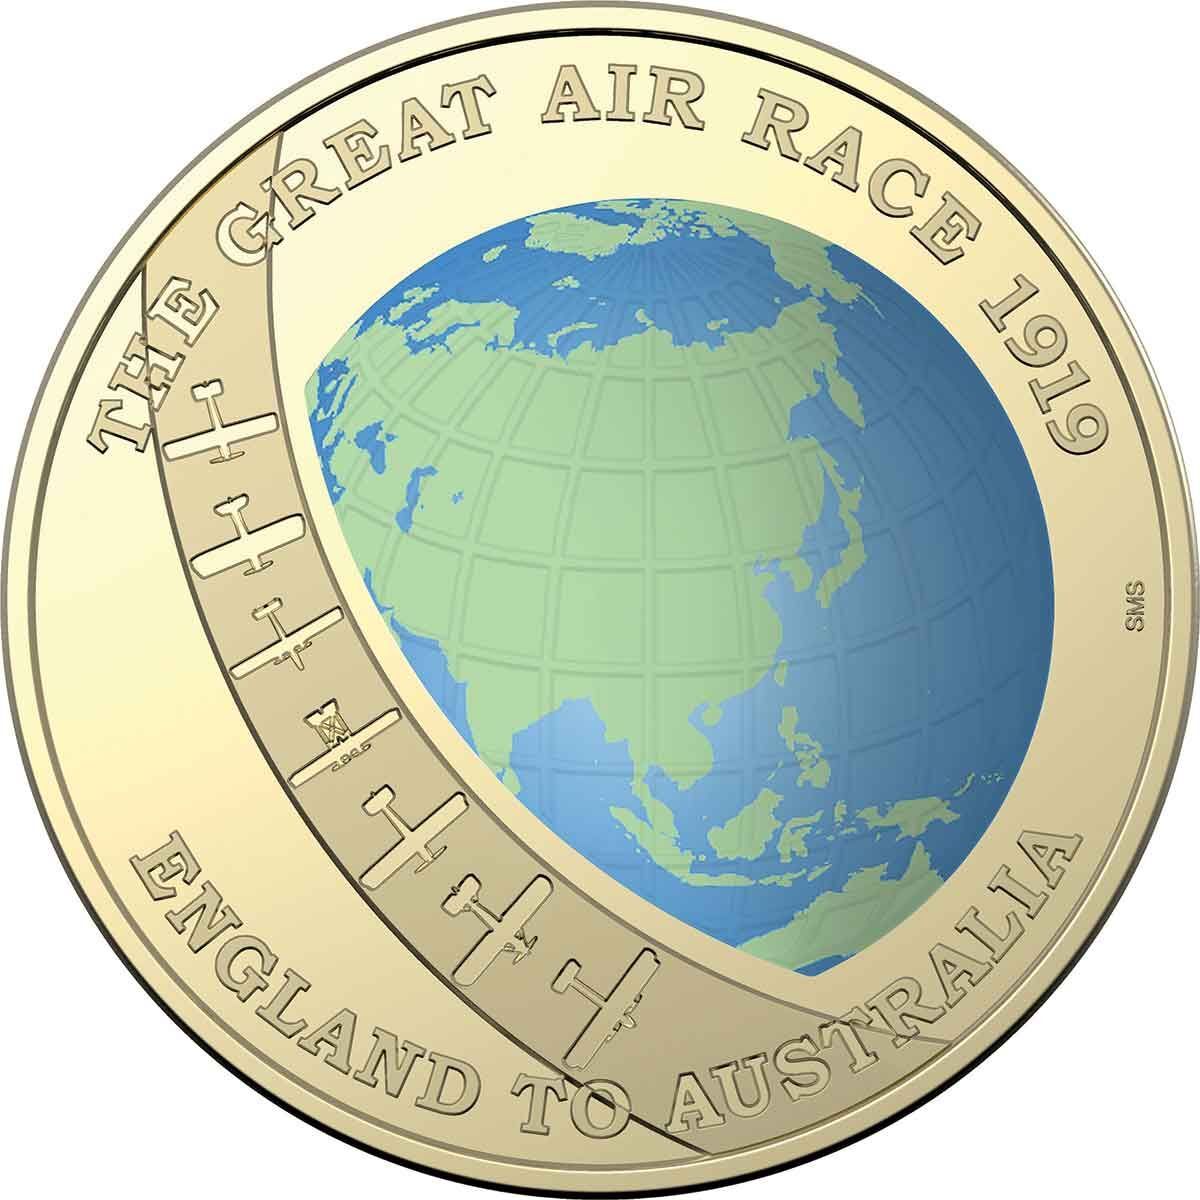 2019 $1 Centenary of the Great Air Race